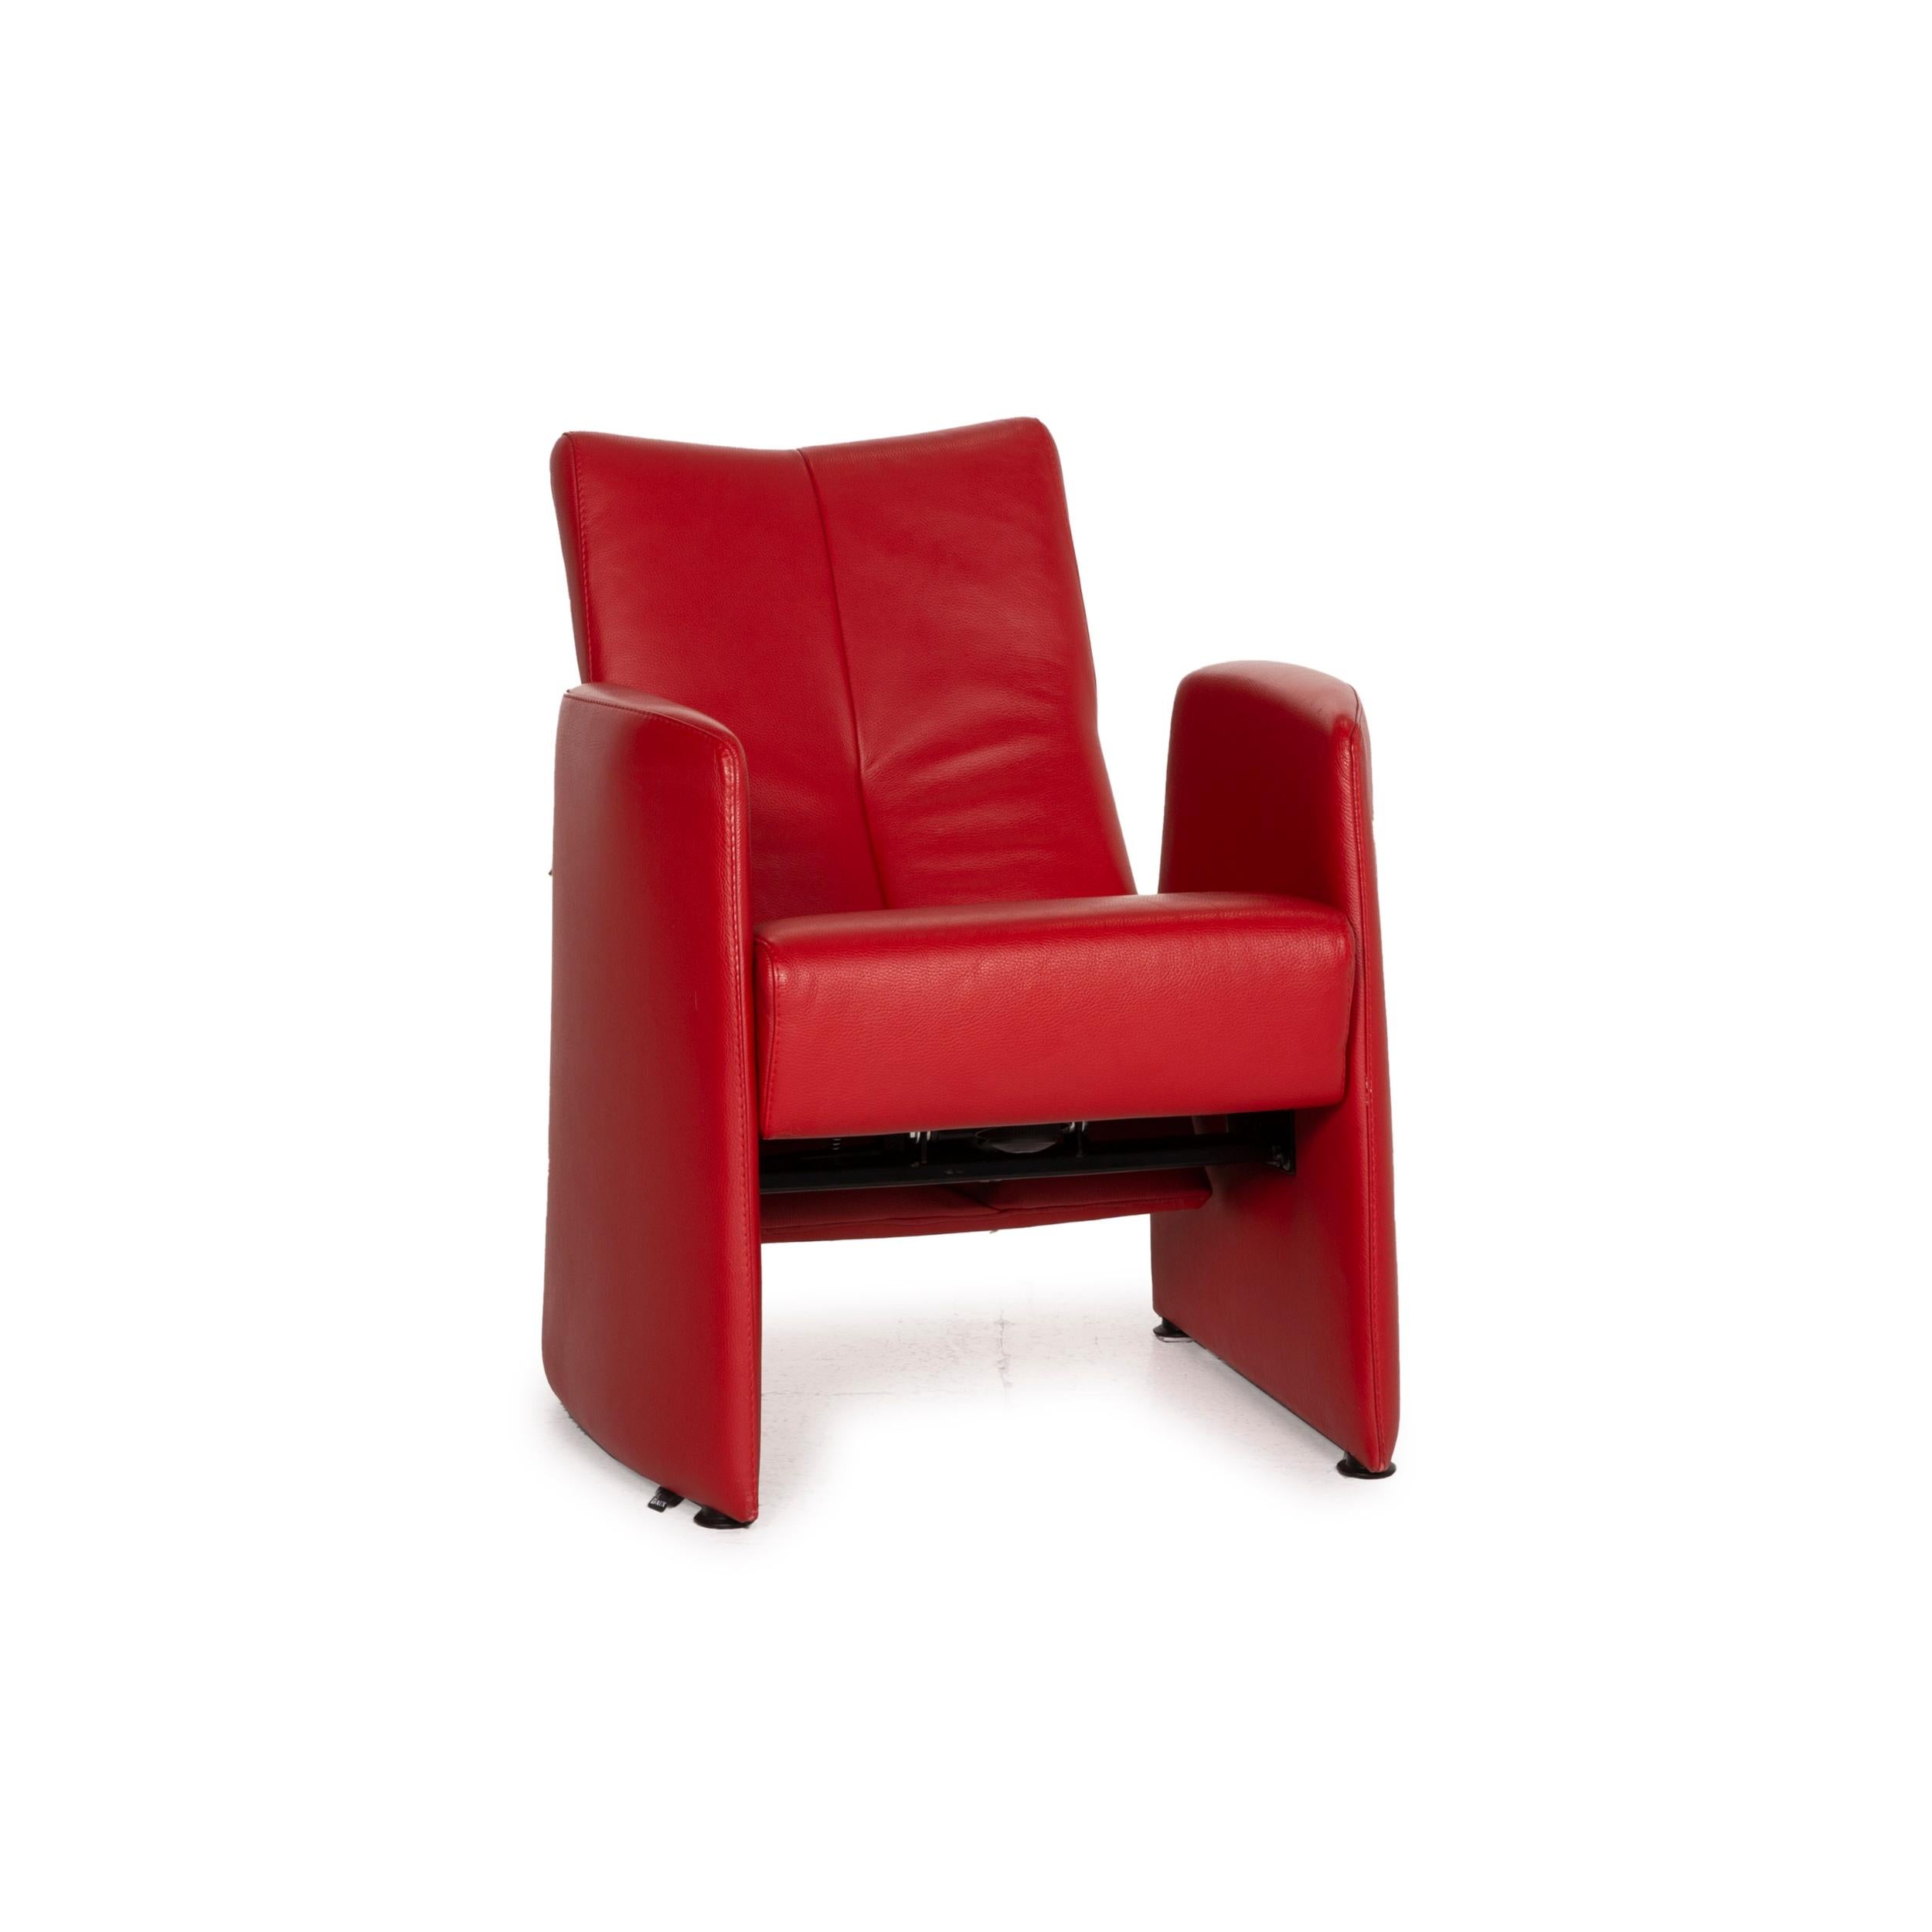 red relax chair